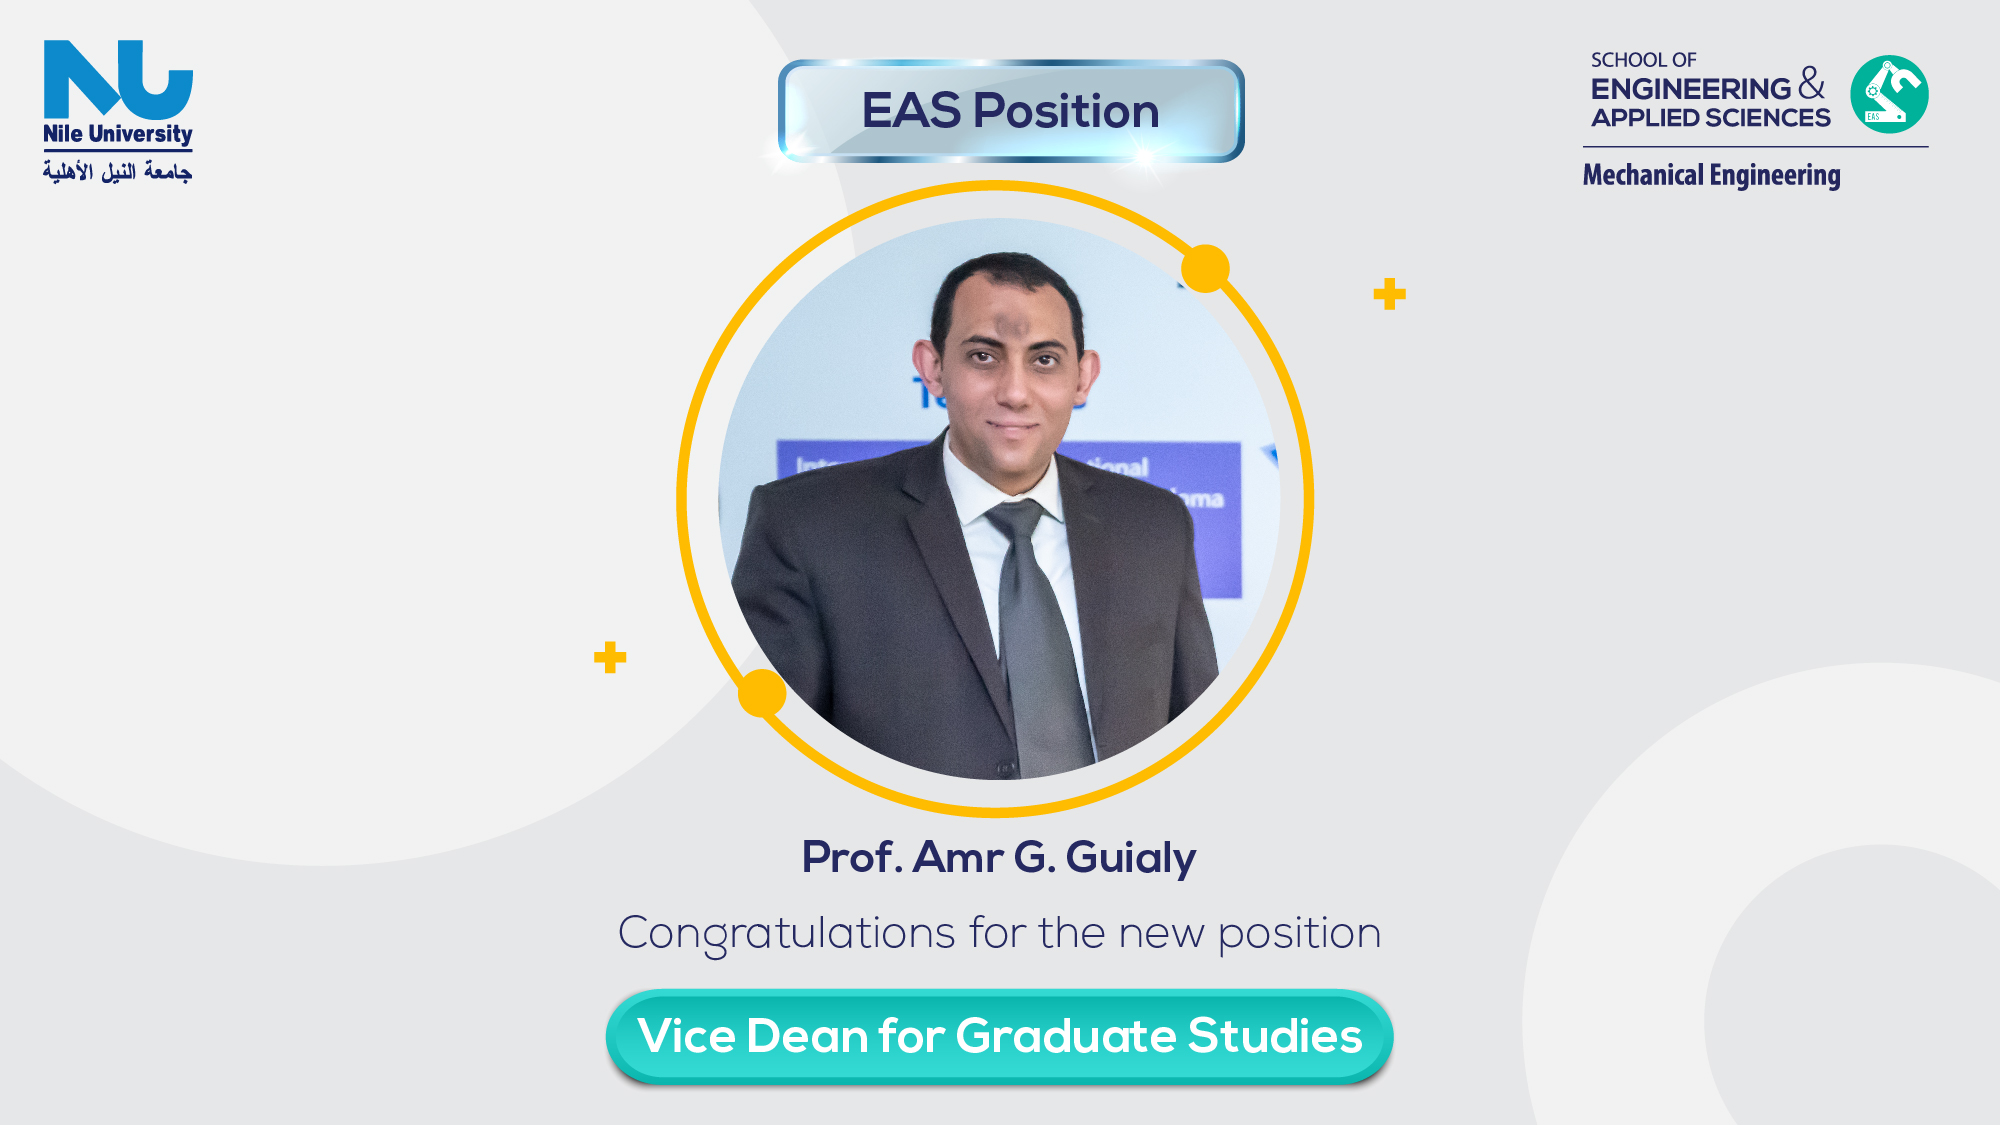 Prof. Amr G. Guialy is The EAS Vice Dean for Graduate Studies.